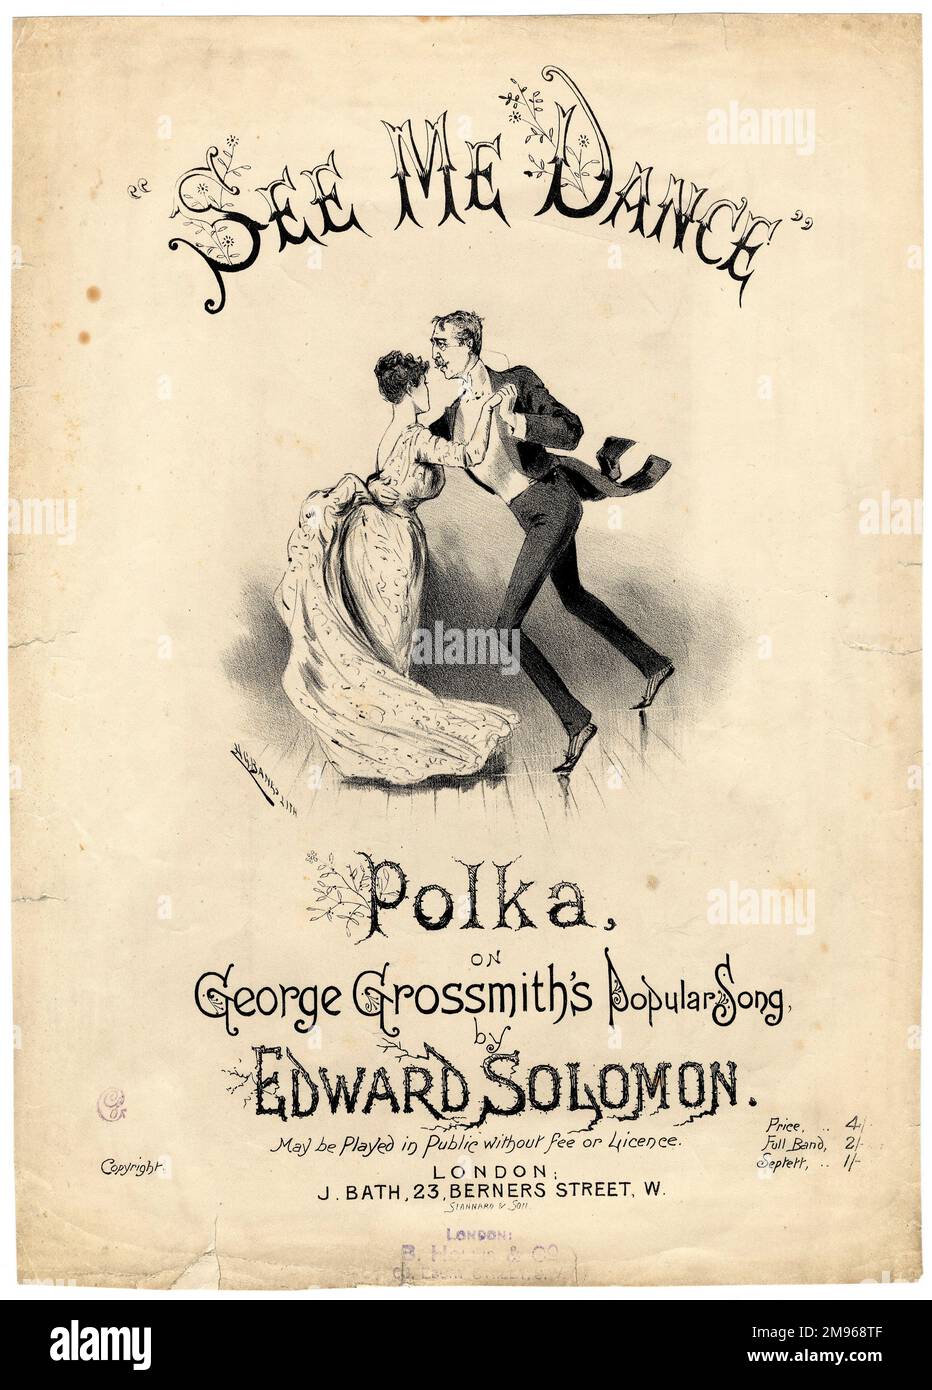 Music cover for See Me Dance the Polka, based on George Grossmith's popular song, arranged by Edward Solomon (1855-1895).  George Grossmith (1847-1912) was an English comedian, writer, composer, actor, and singer.  He was famous for performing his own comic piano sketches and songs, including this one, which he wrote in 1886, and which is still known today.  A couple are depicted dancing the polka -- the man looks very much like Grossmith himself. Stock Photo